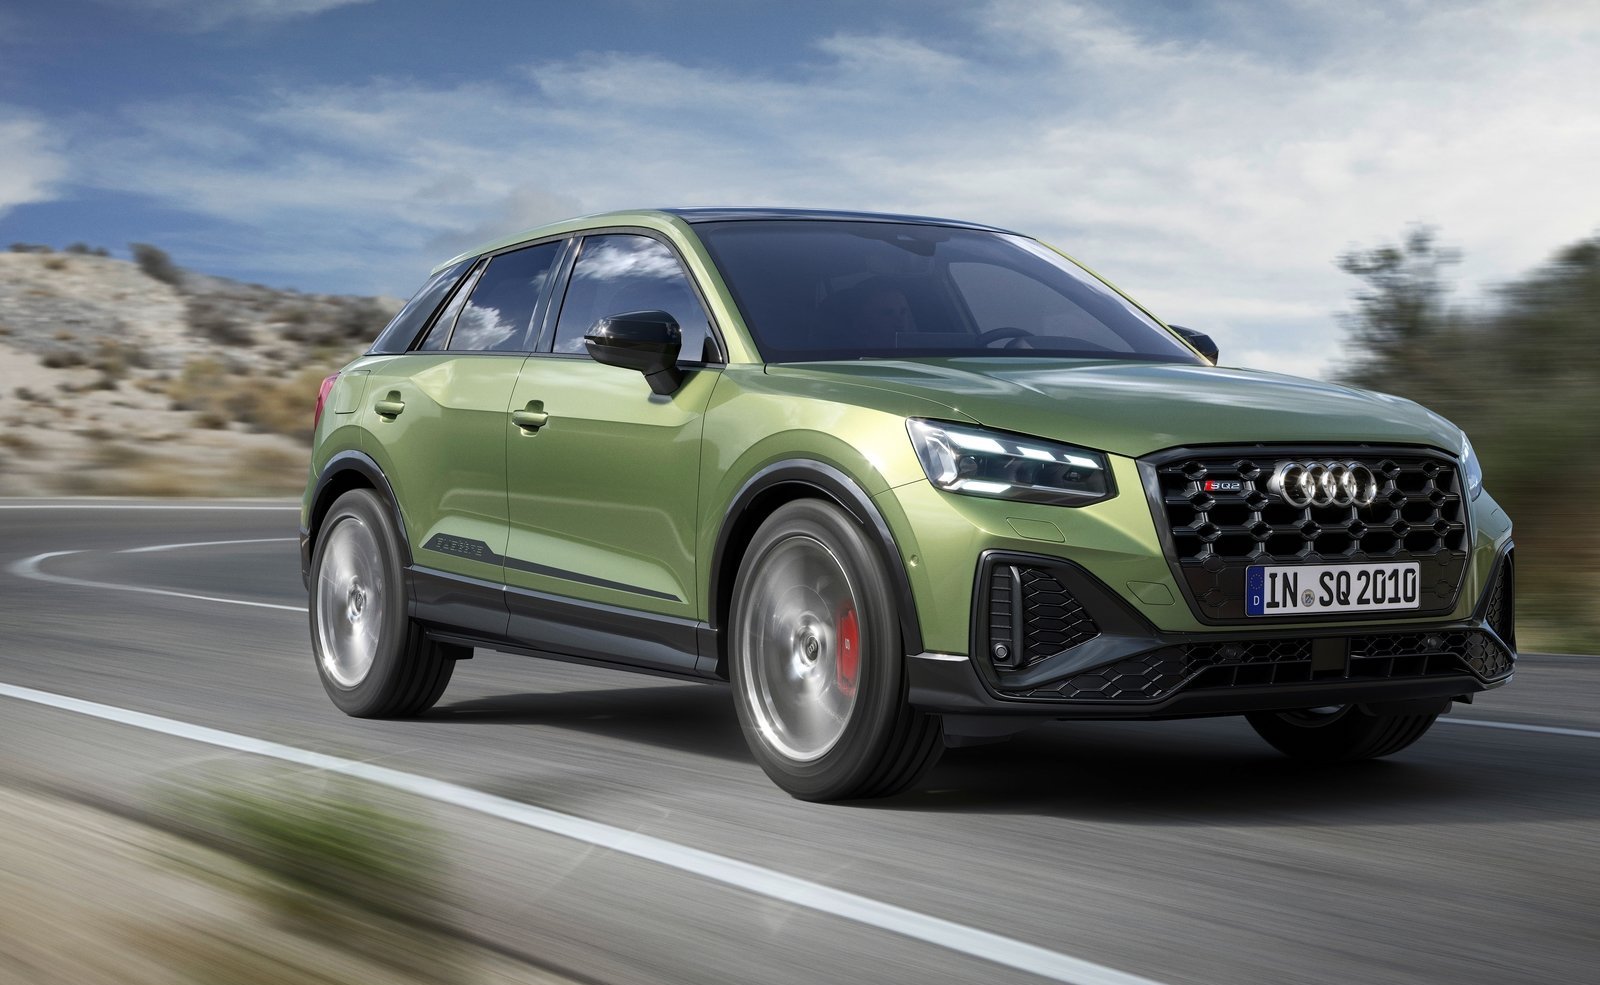 2021 Audi SQ2 on sale in Australia from $64,400, arrives May